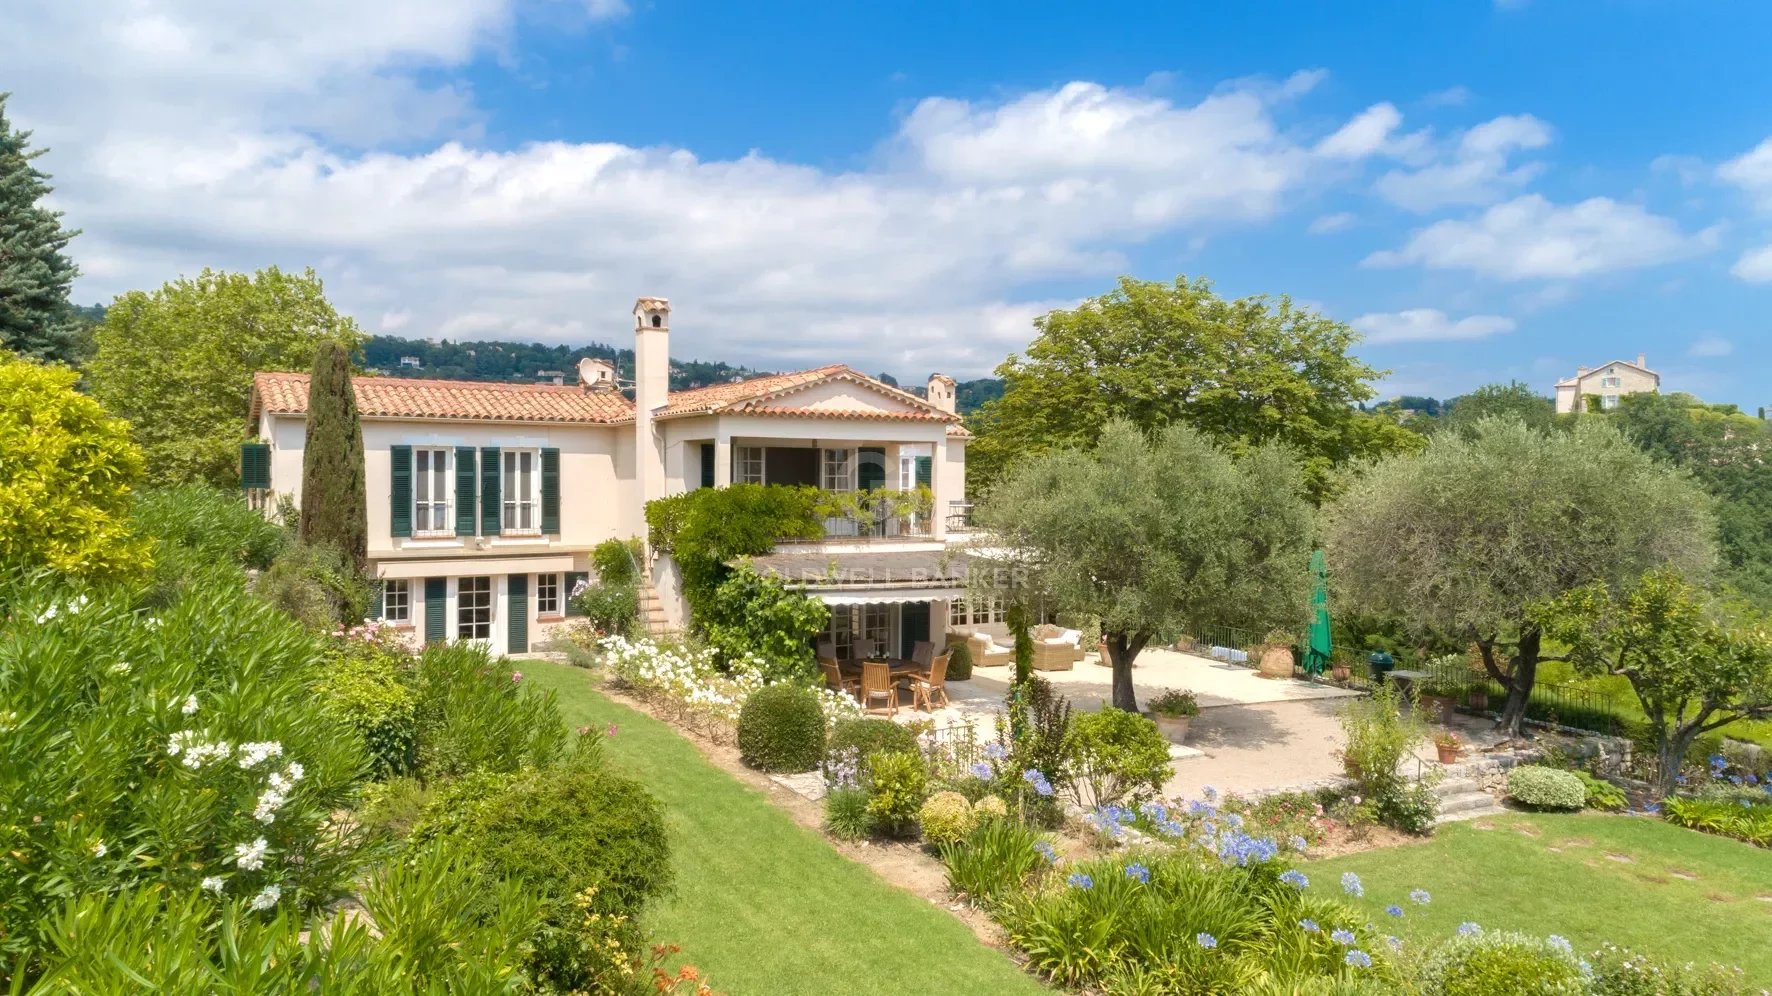 Lovely Provençal house located in a quiet area